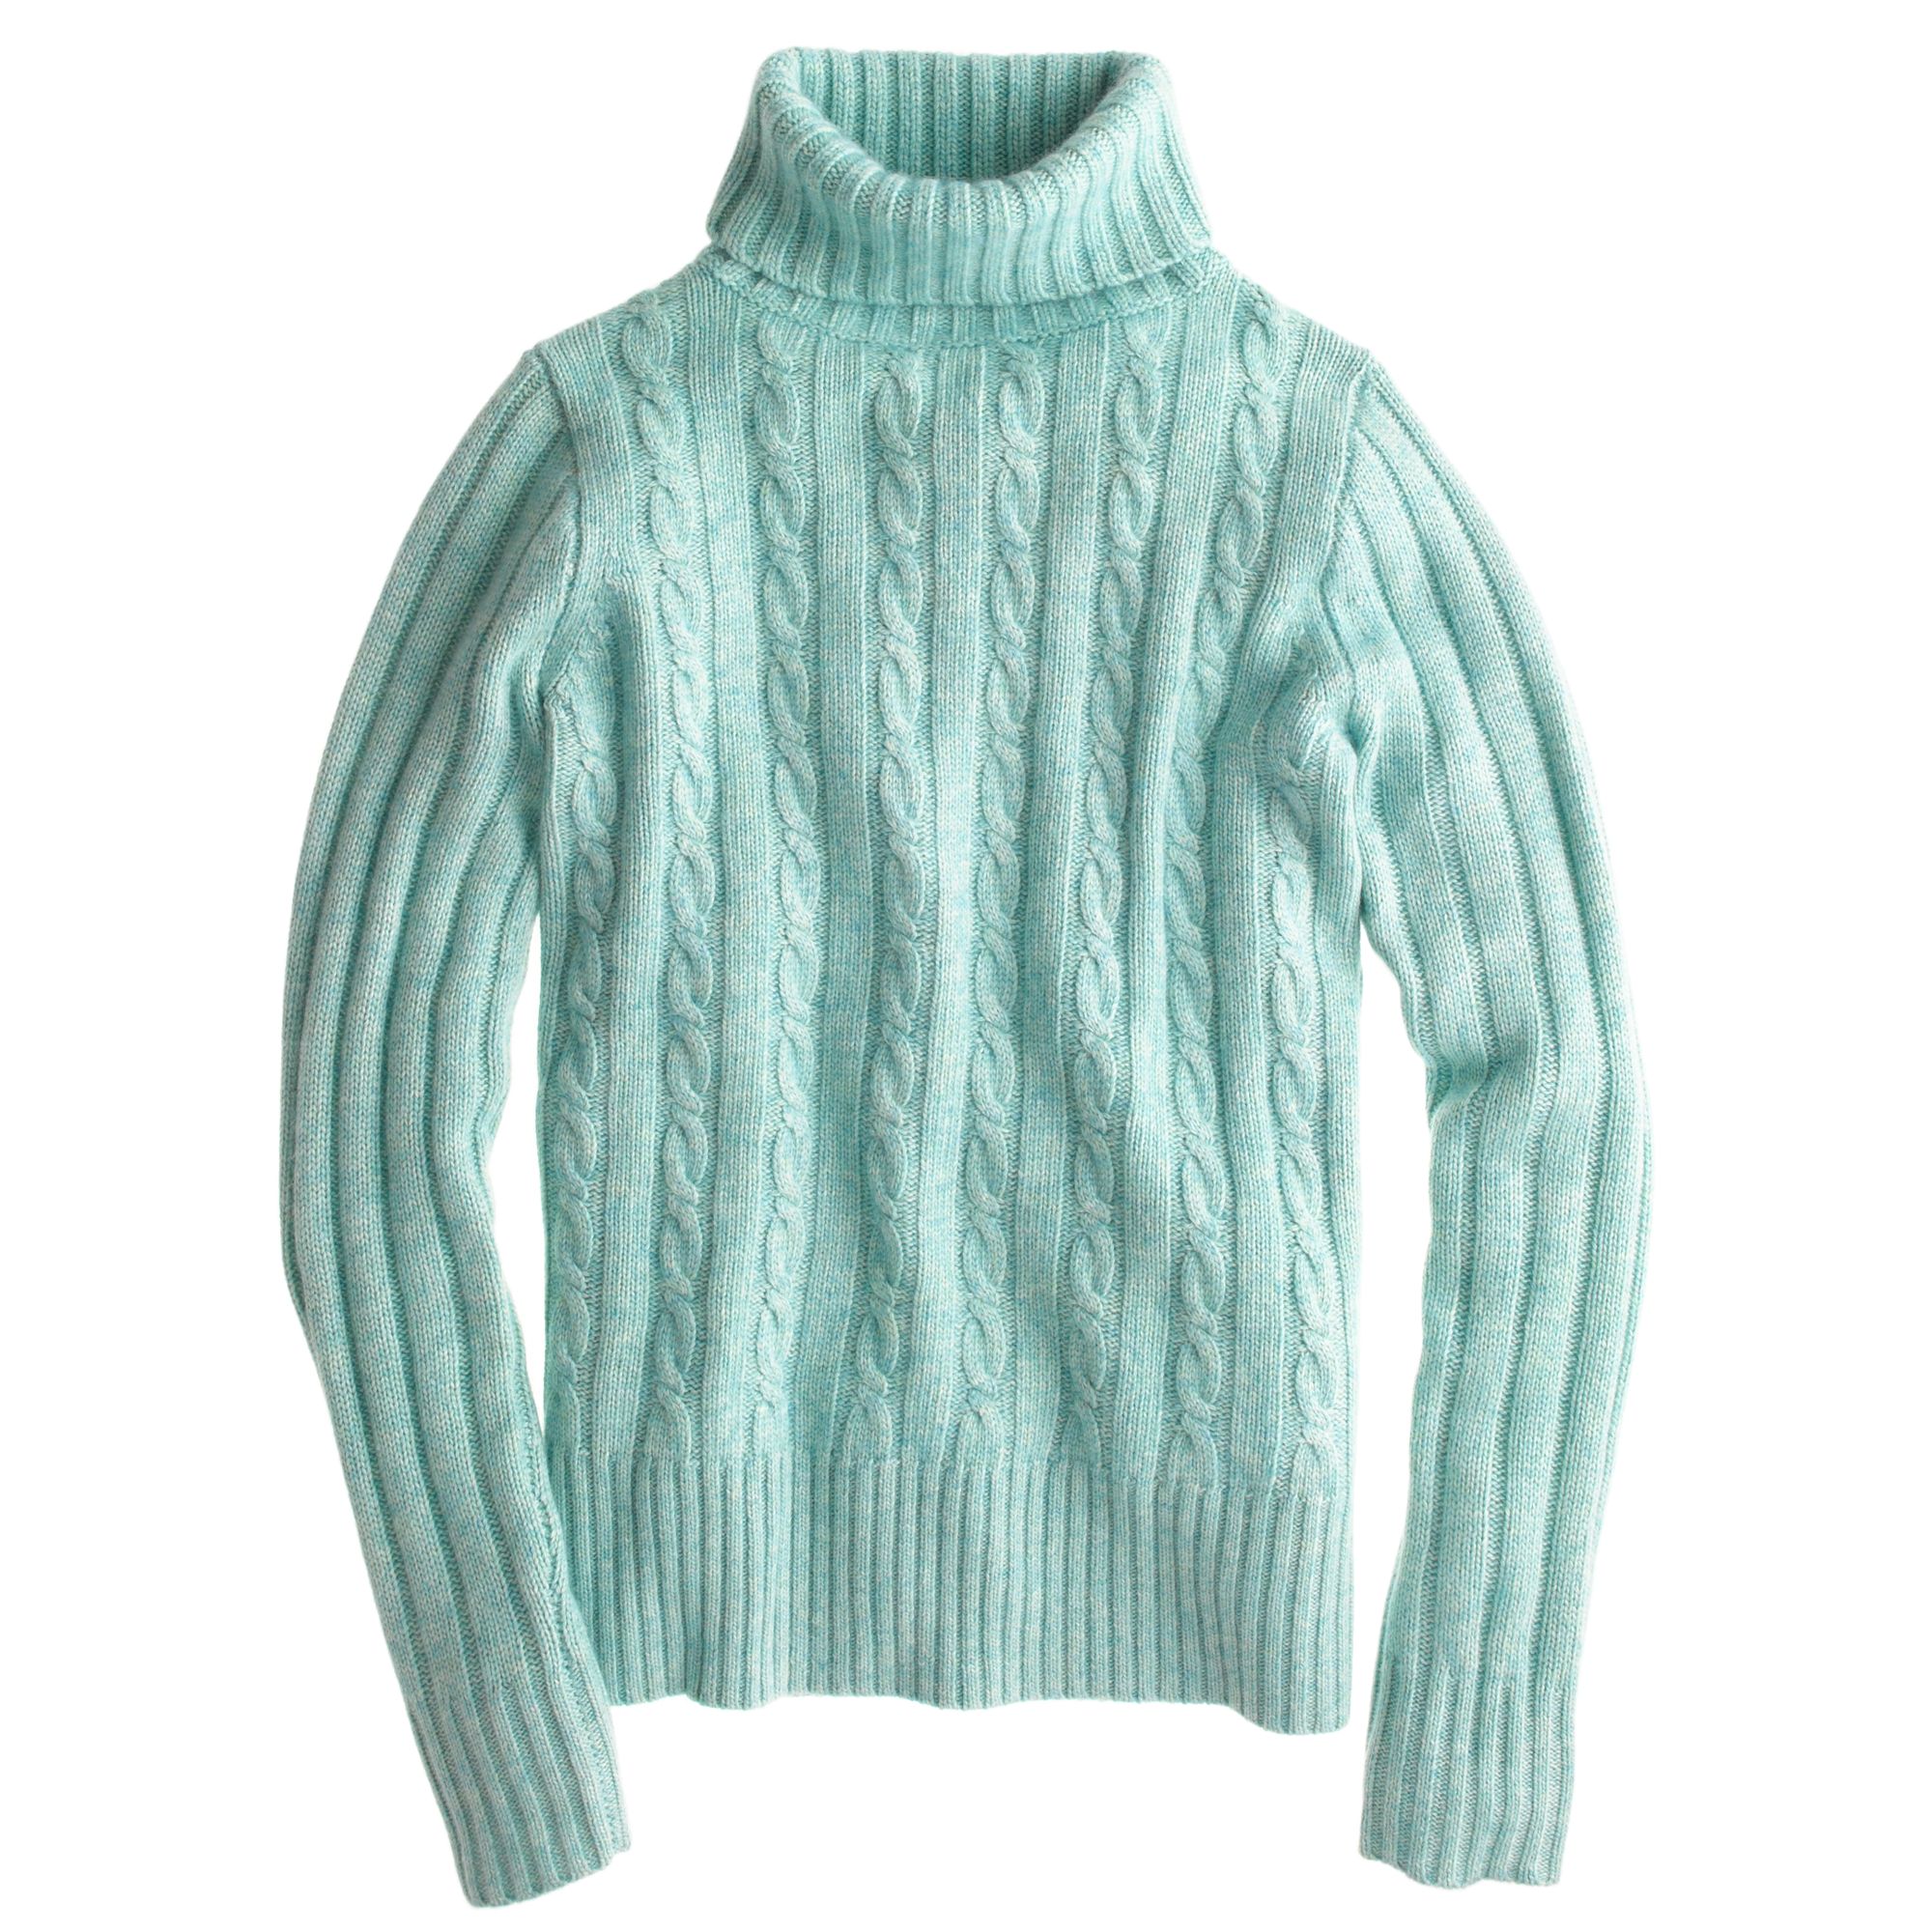 J.crew Preorder Cambridge Cable Chunky Turtleneck Sweater in Green